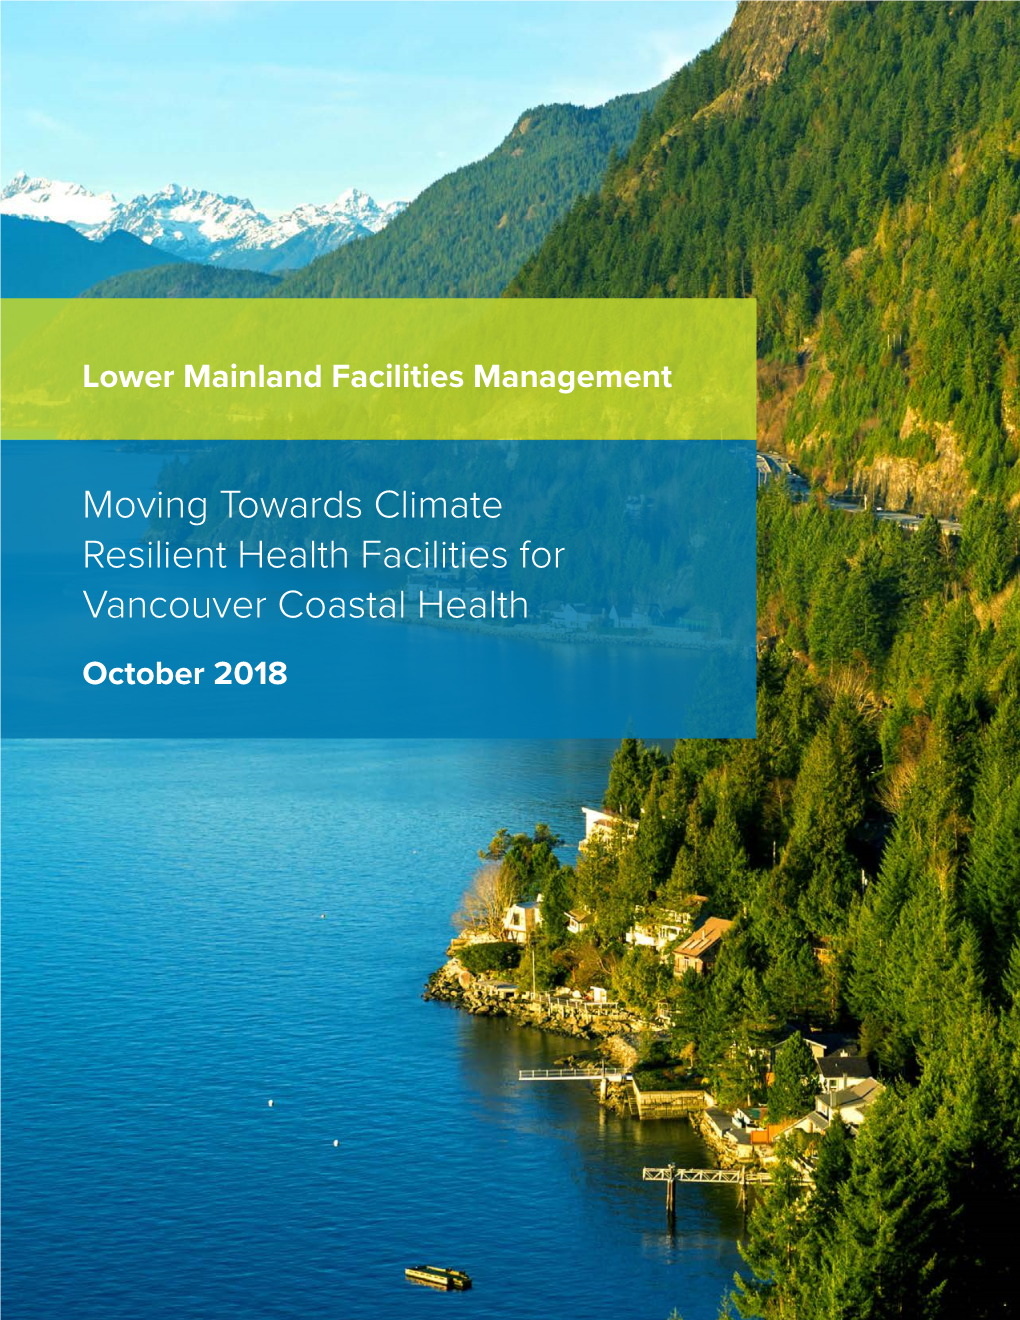 Moving Towards Climate Resilient Health Facilities for Vancouver Coastal Health